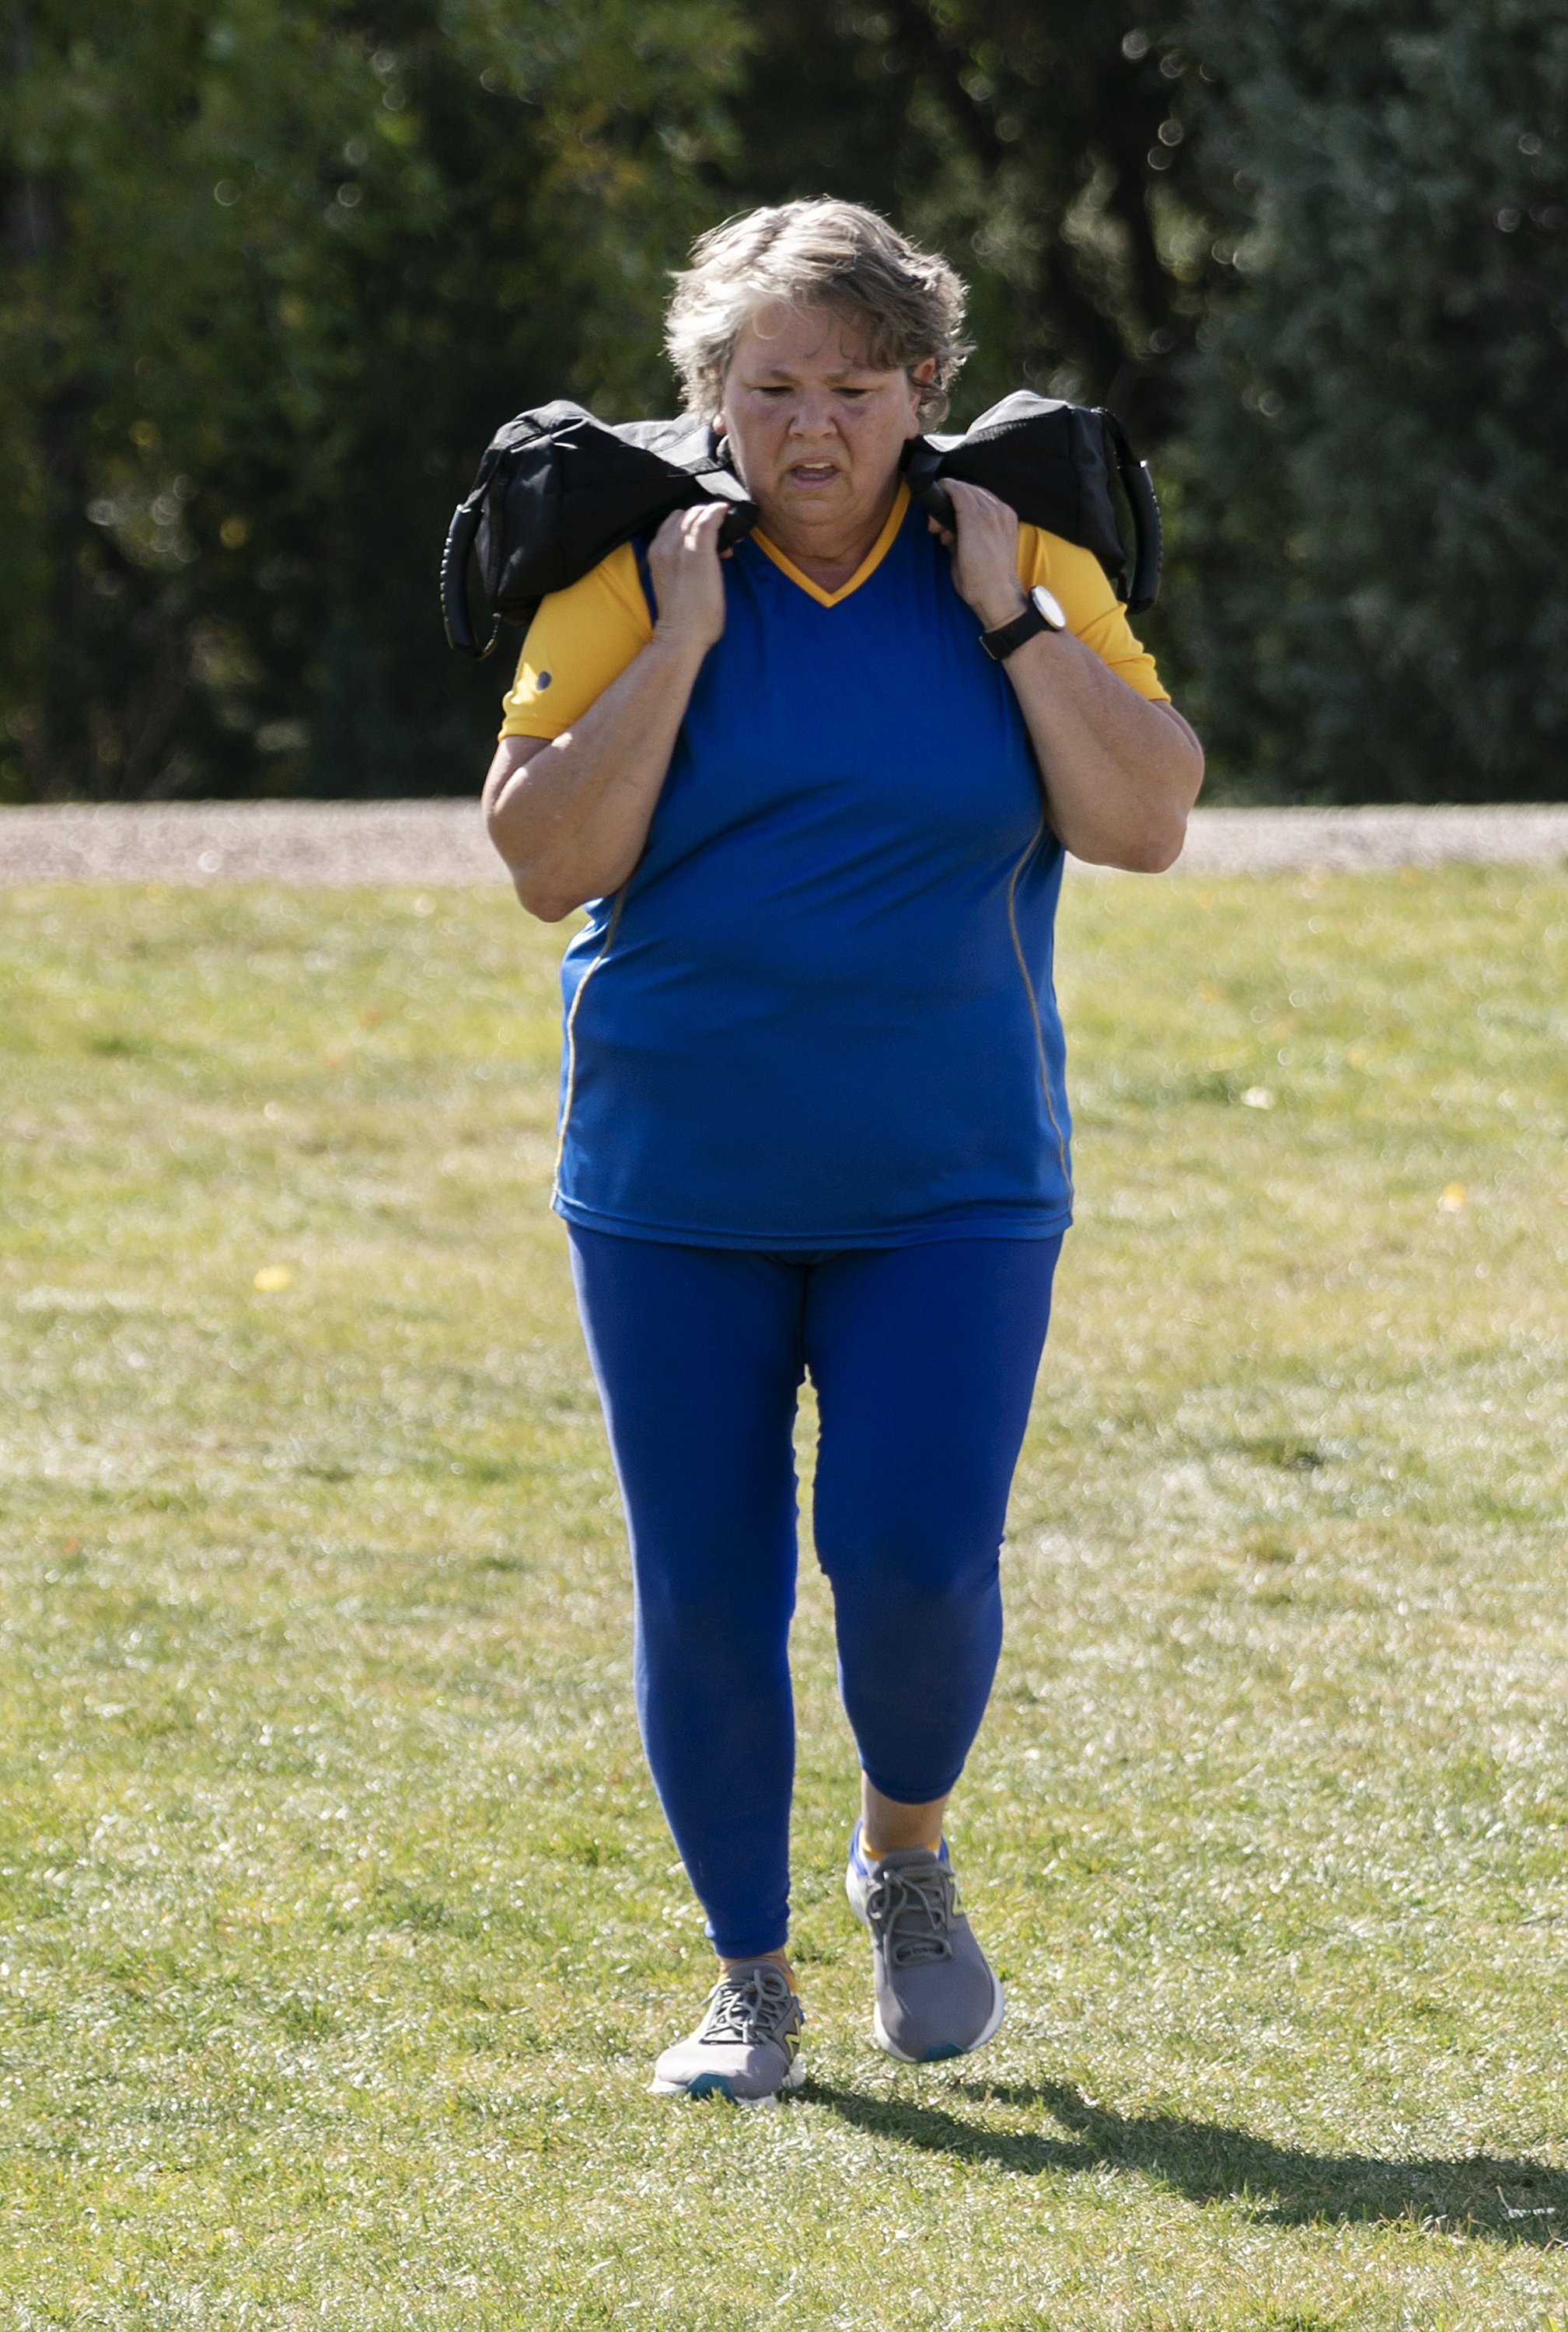 Kim Davis pictured during episode 106 of "The Biggest Loser." | Source: Getty Images